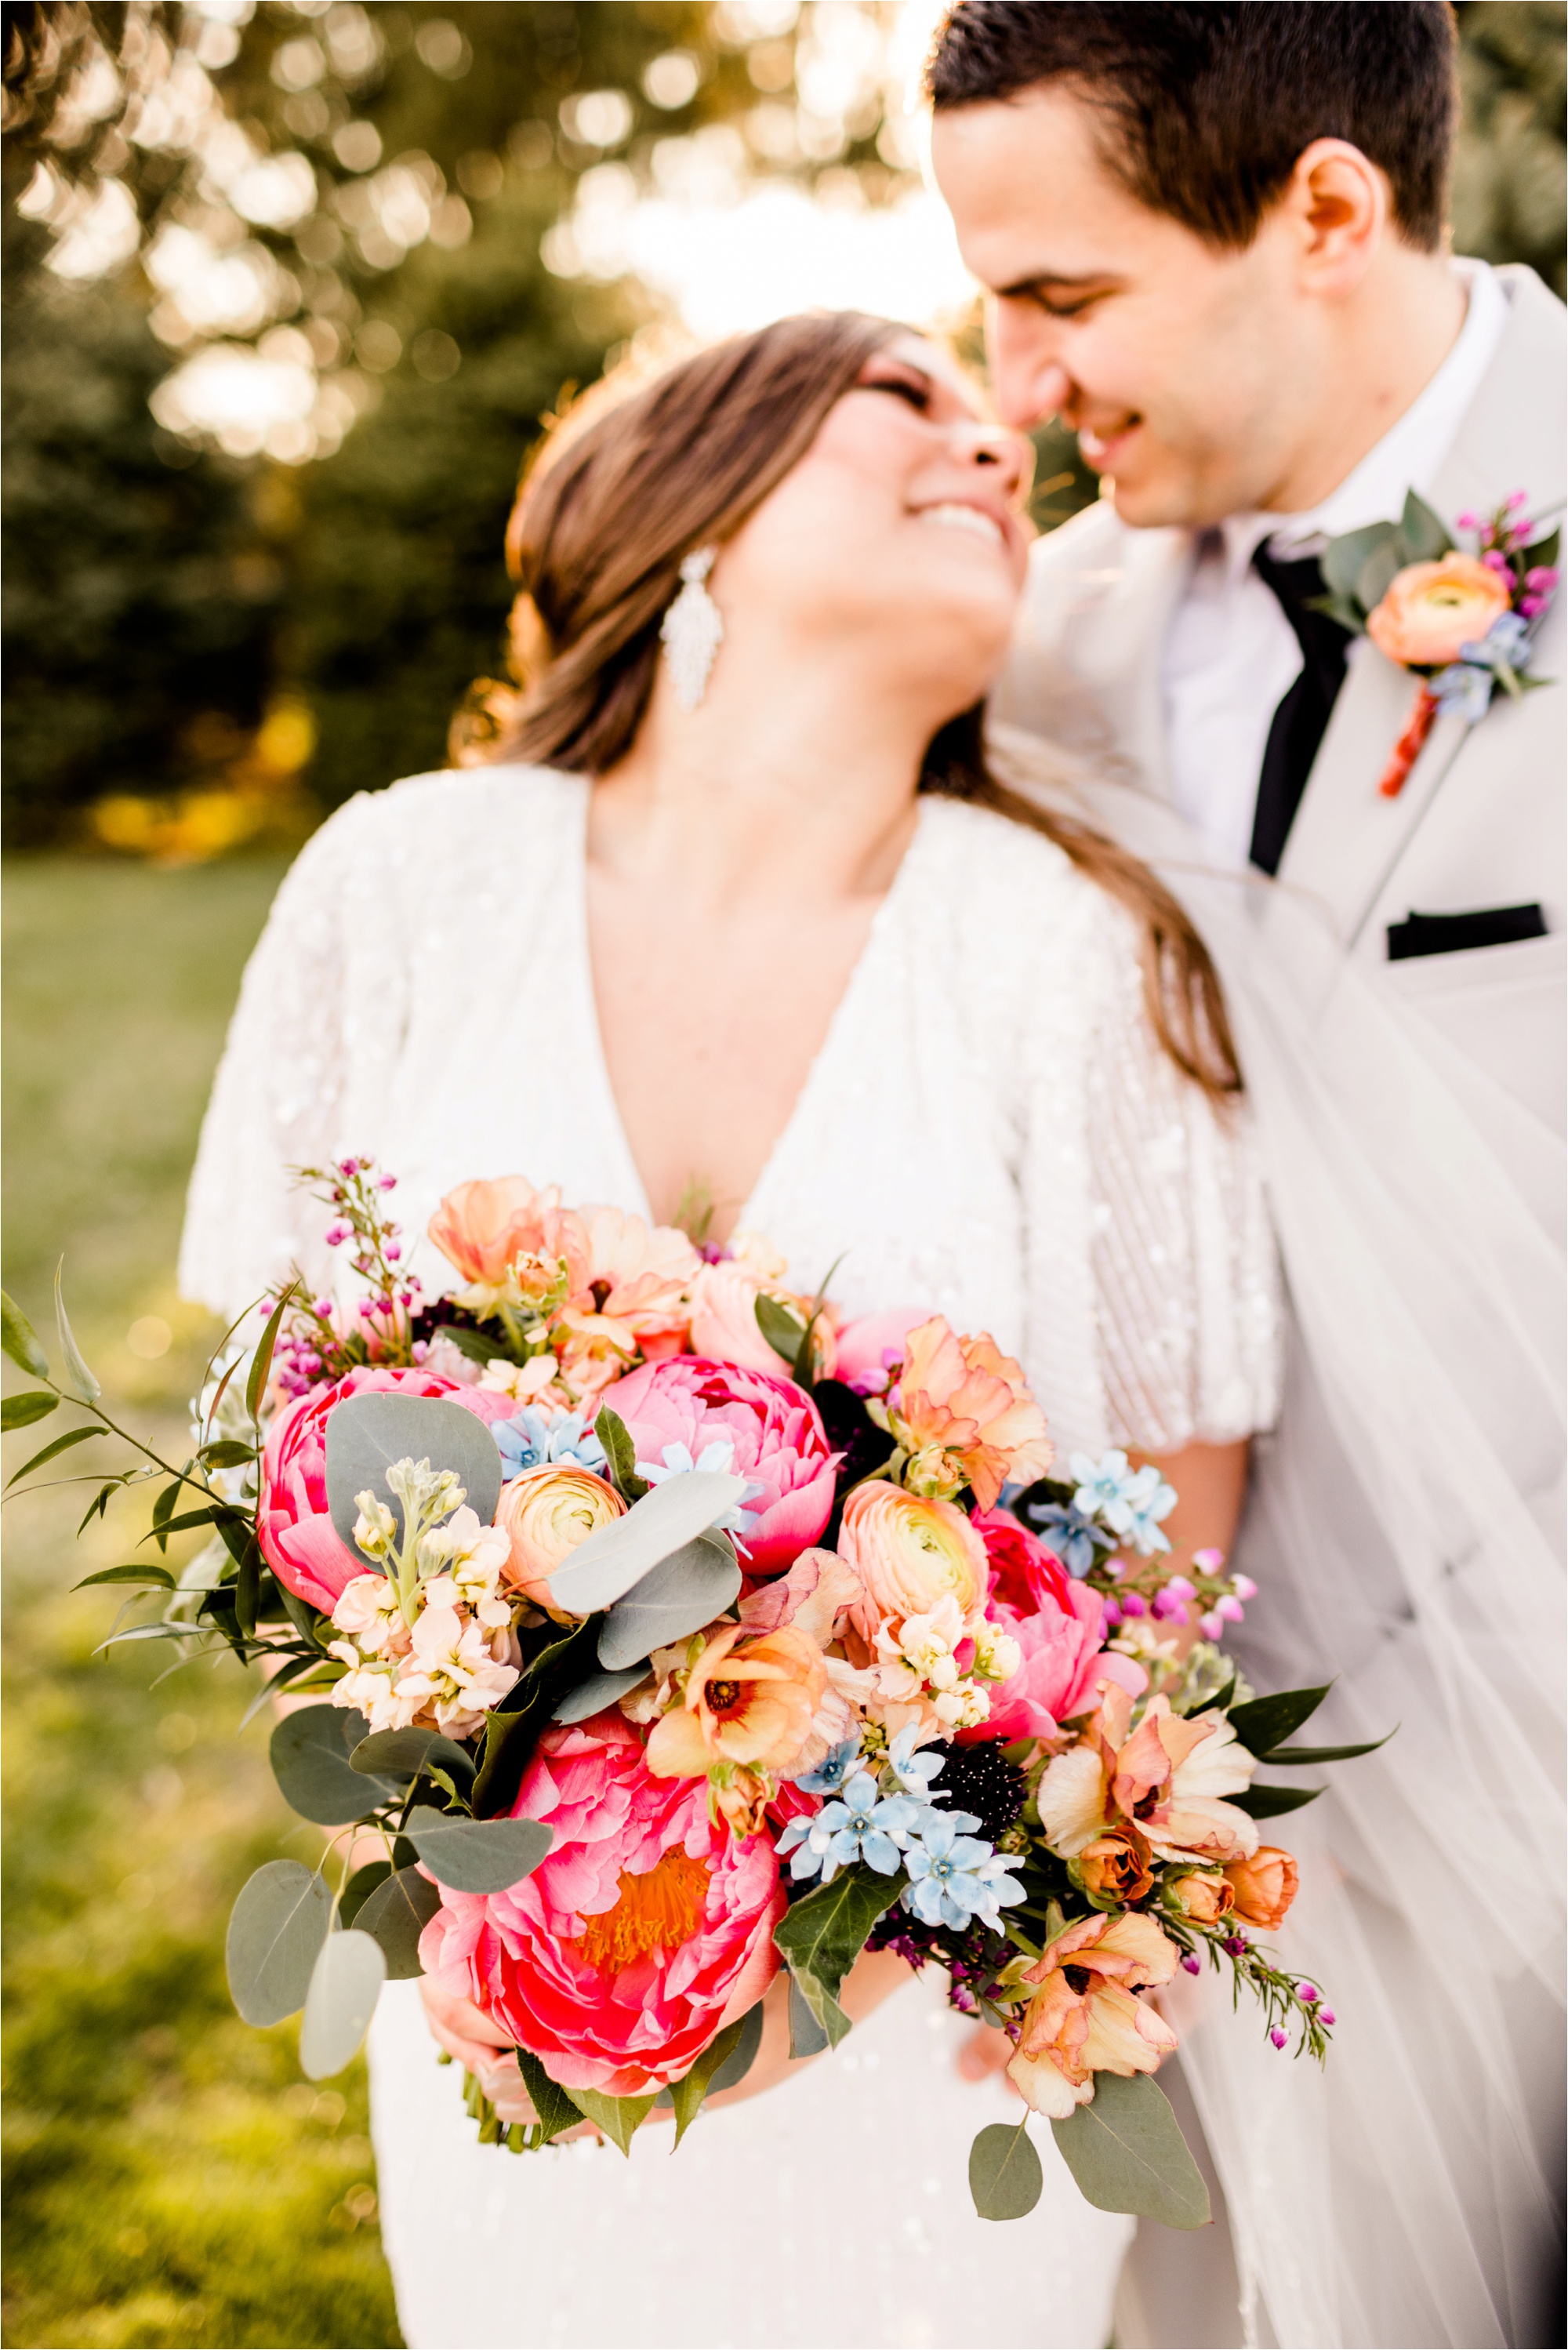 Caitlin and Luke Photography, Illinois Wedding Photographers, Champaign Wedding Photographers, Bloomington Normal Wedding Photographers, Romantic Red and Pink Sunset Styled Shoot_9554.jpg